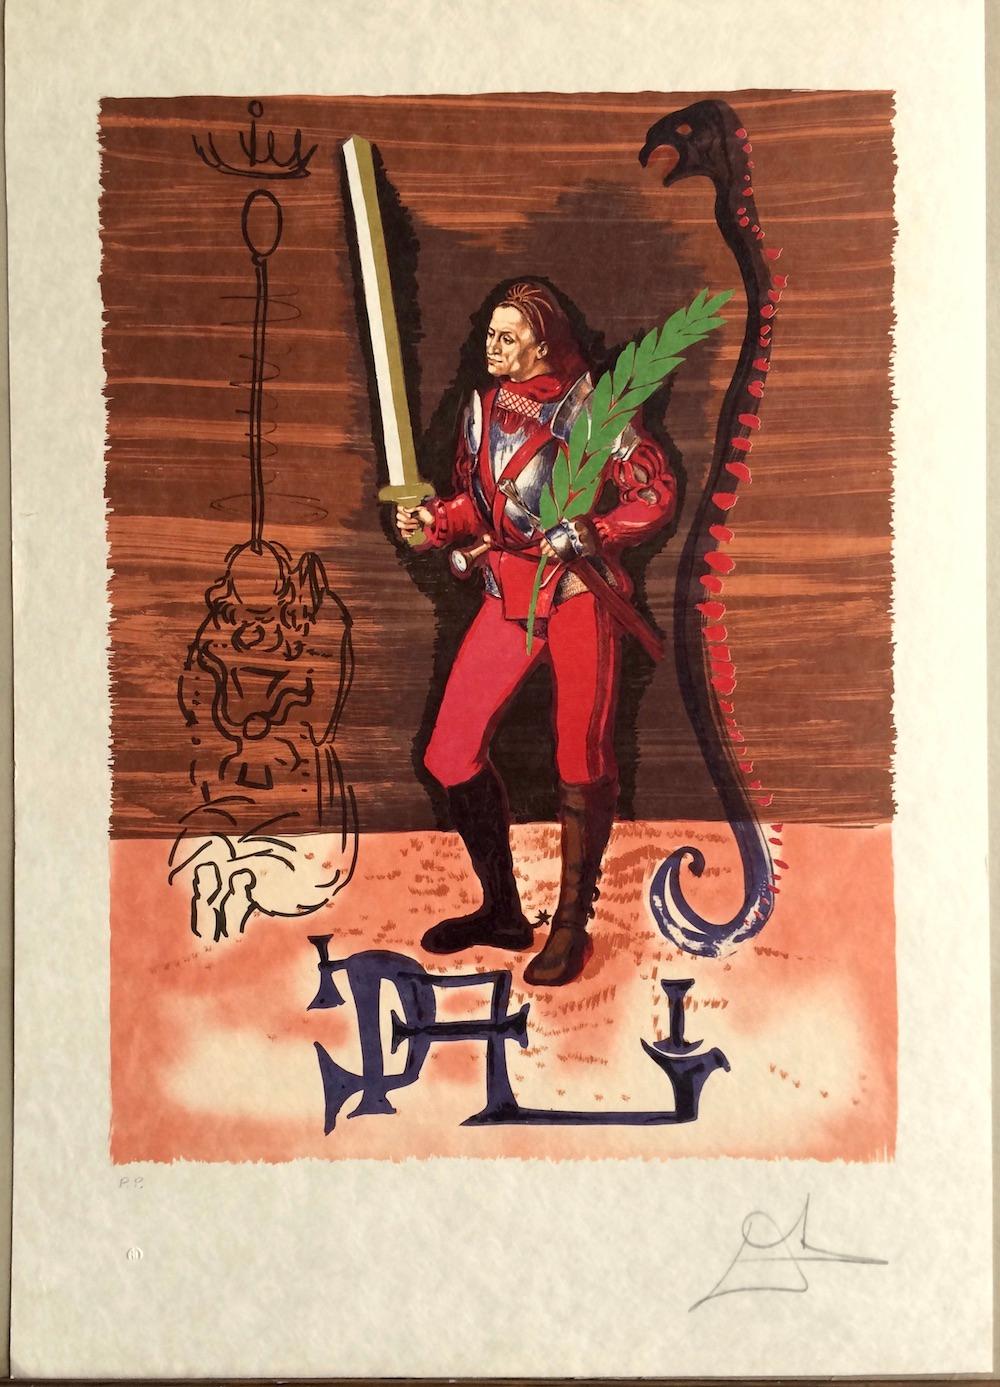 COLUMBUS DISCOVERS AMERICA(Jack of Swords) Signed Lithograph on Japon Paper, Red For Sale 1